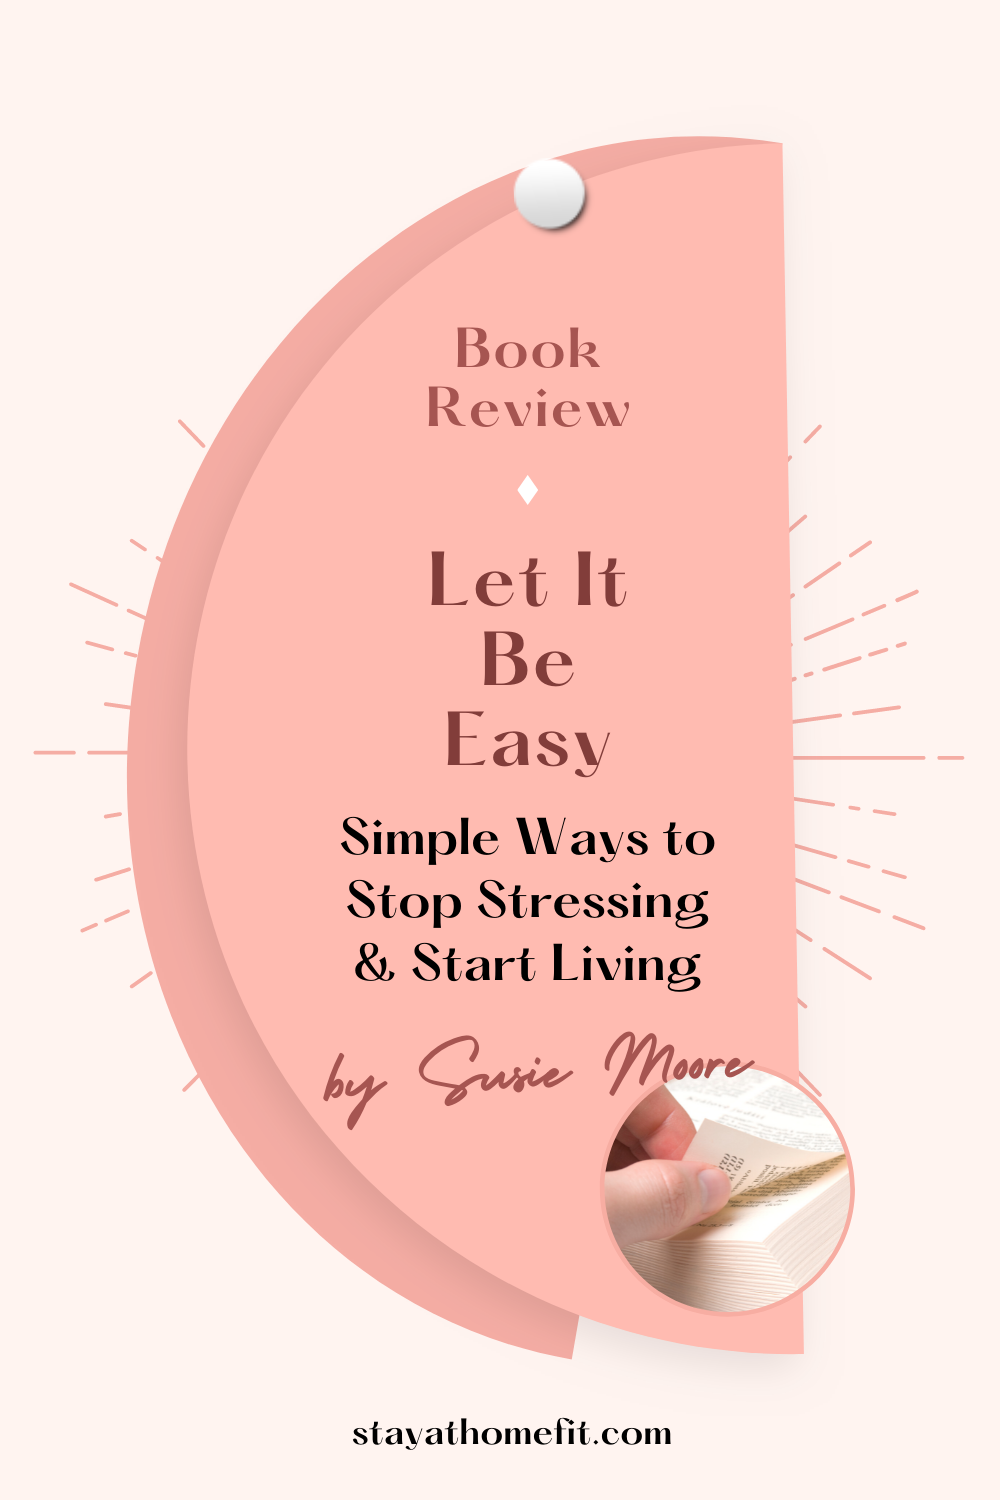 Let It Be Easy by Susie Moore Book Review